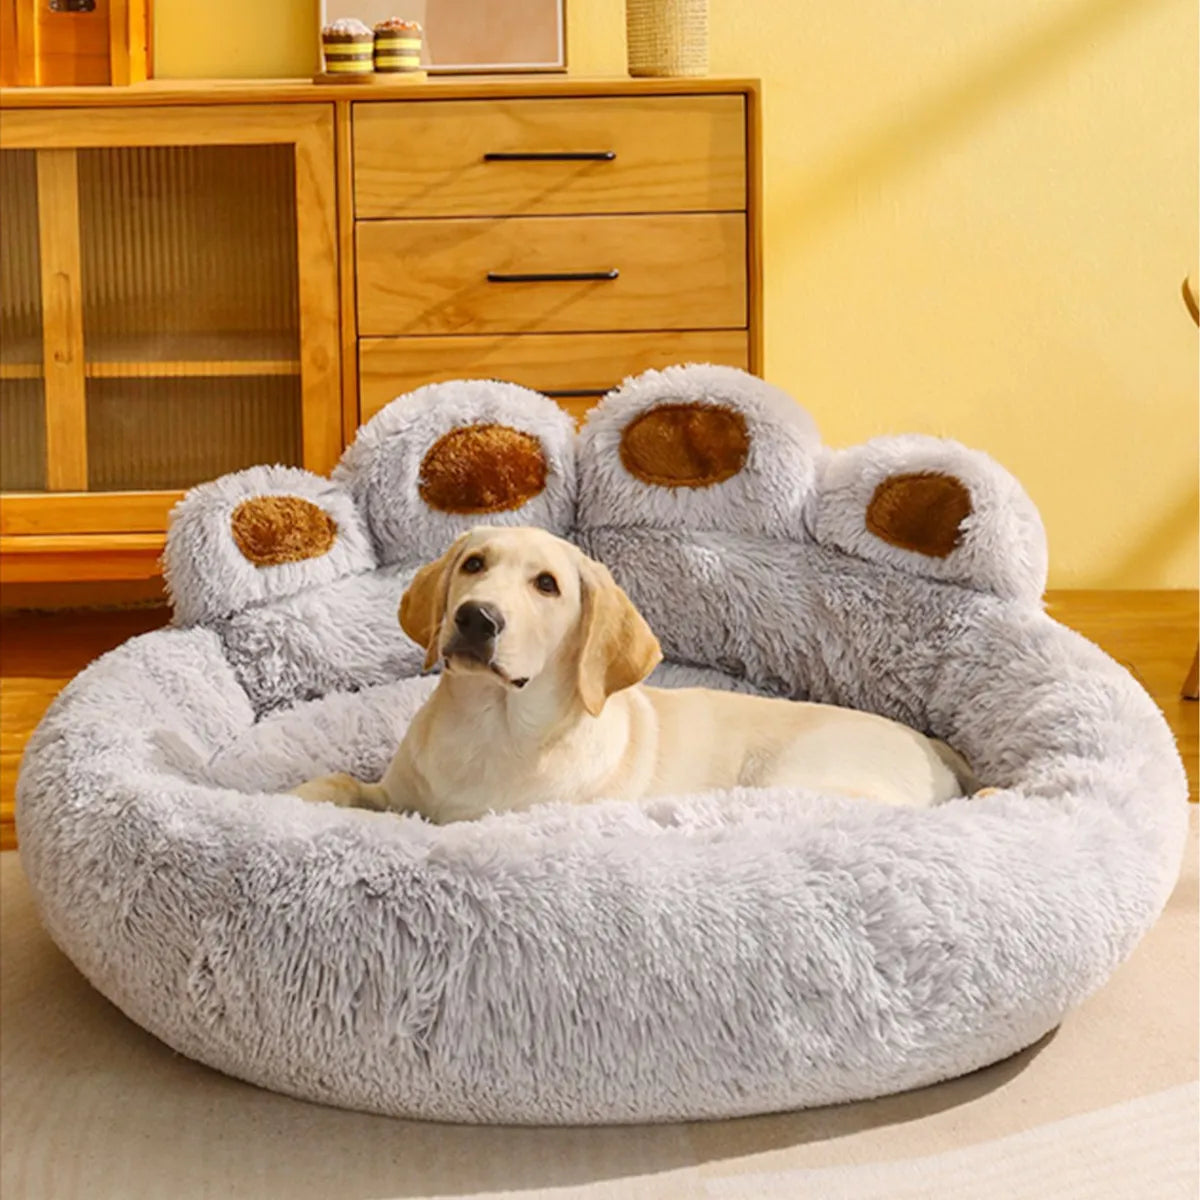 Cozy Pet Sofa Beds: Washable Plush Mats for Small and Large Dogs, Puppies, and Cats